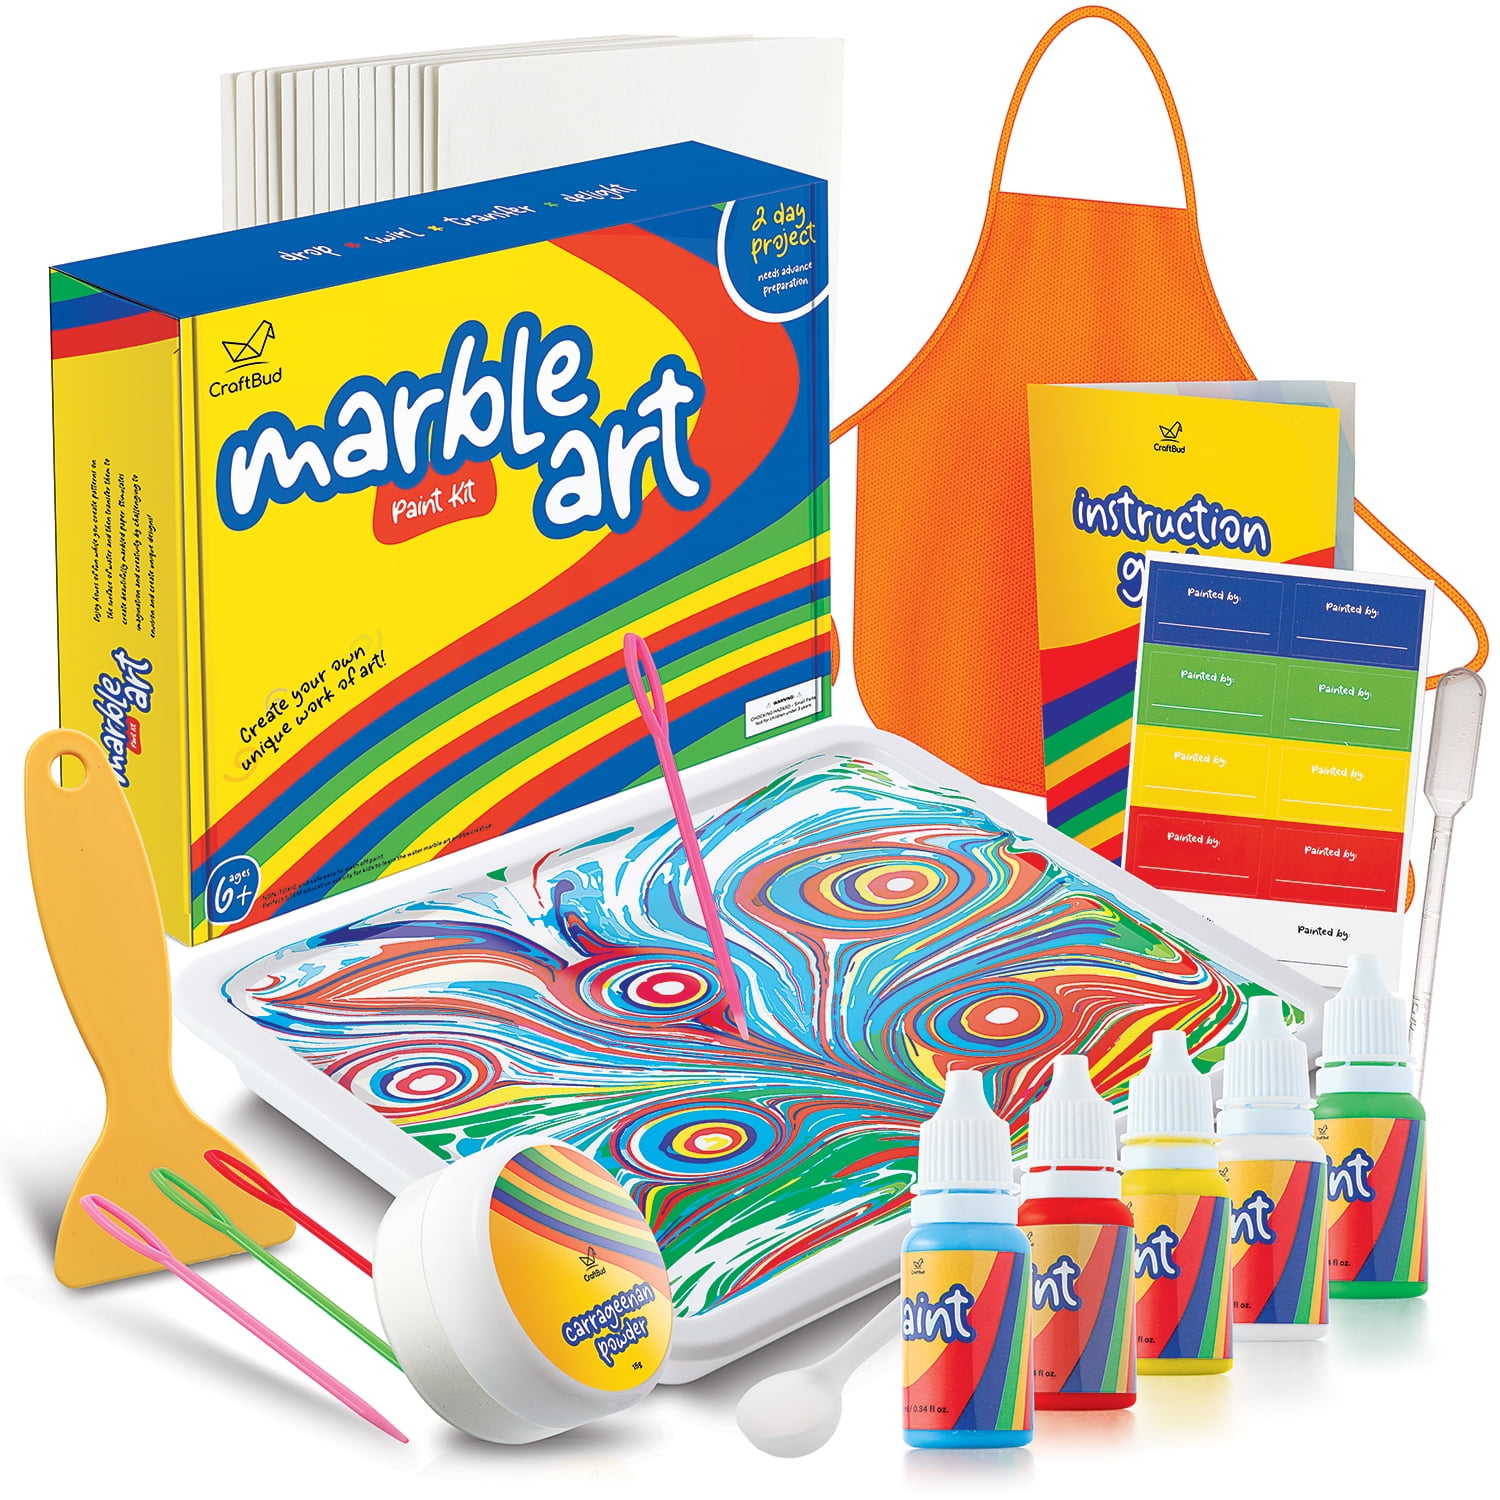 Children's Paint and Paint Supplies in Arts & Crafts for Kids 